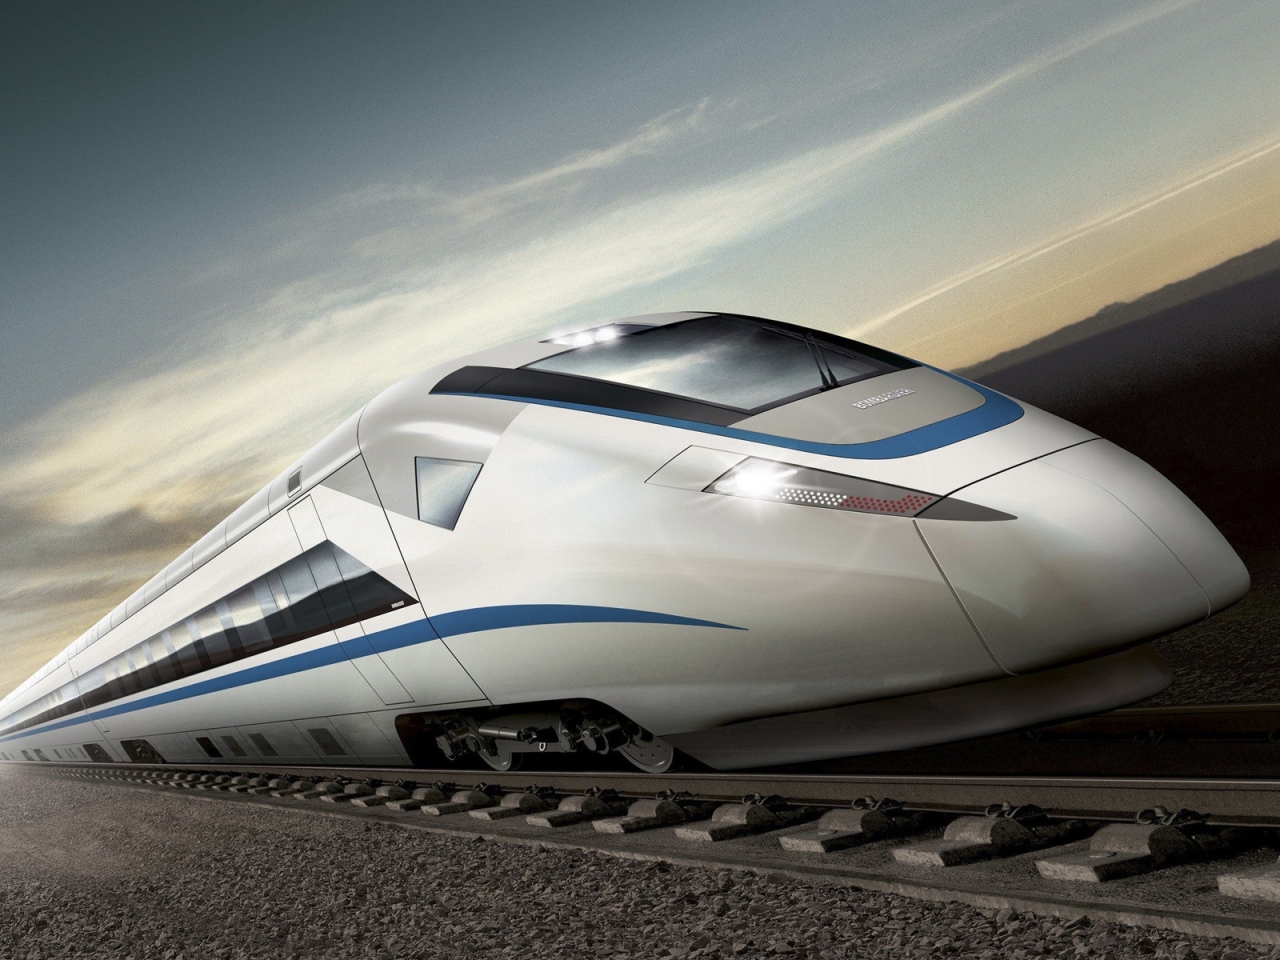 Bullet Train for 1280 x 960 resolution